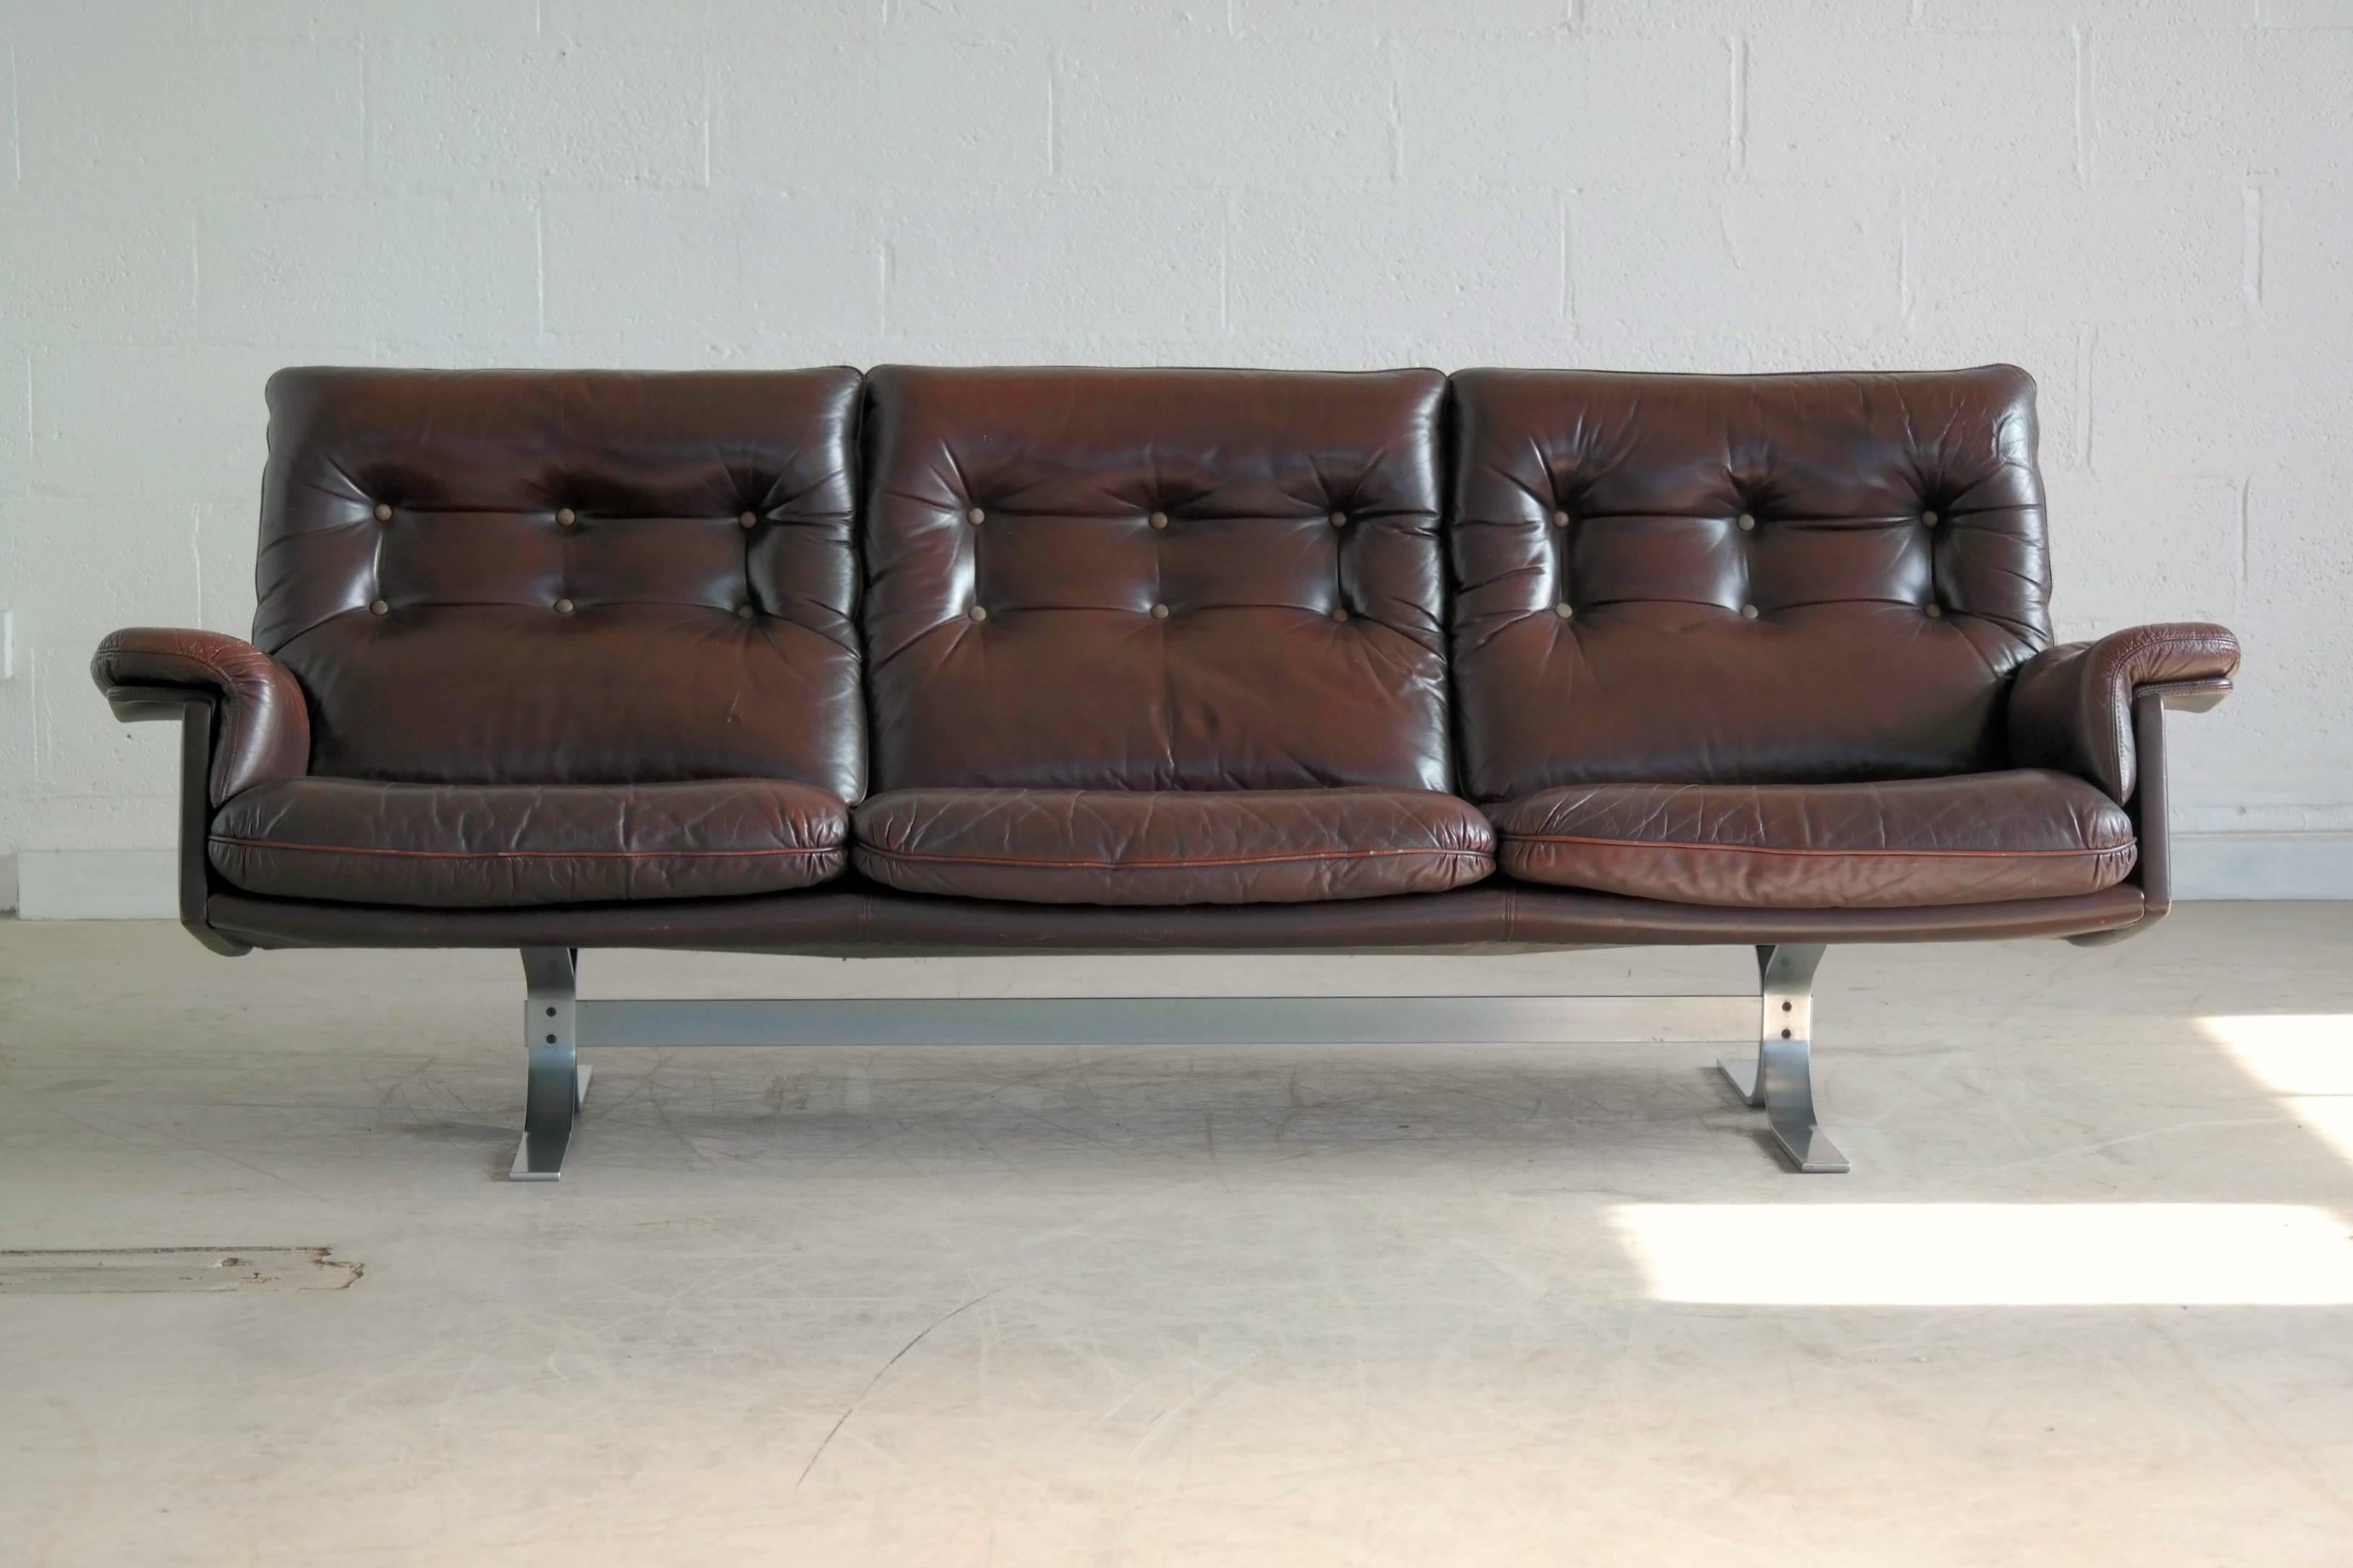 Beautiful and ultra-cool sofa in brown patent leather by Arne Norell and manufactured by Vatne Møbler, Norway. While the style is typical for Norell this model is quite rare. The condition is very good with no rips or tears to the leather although